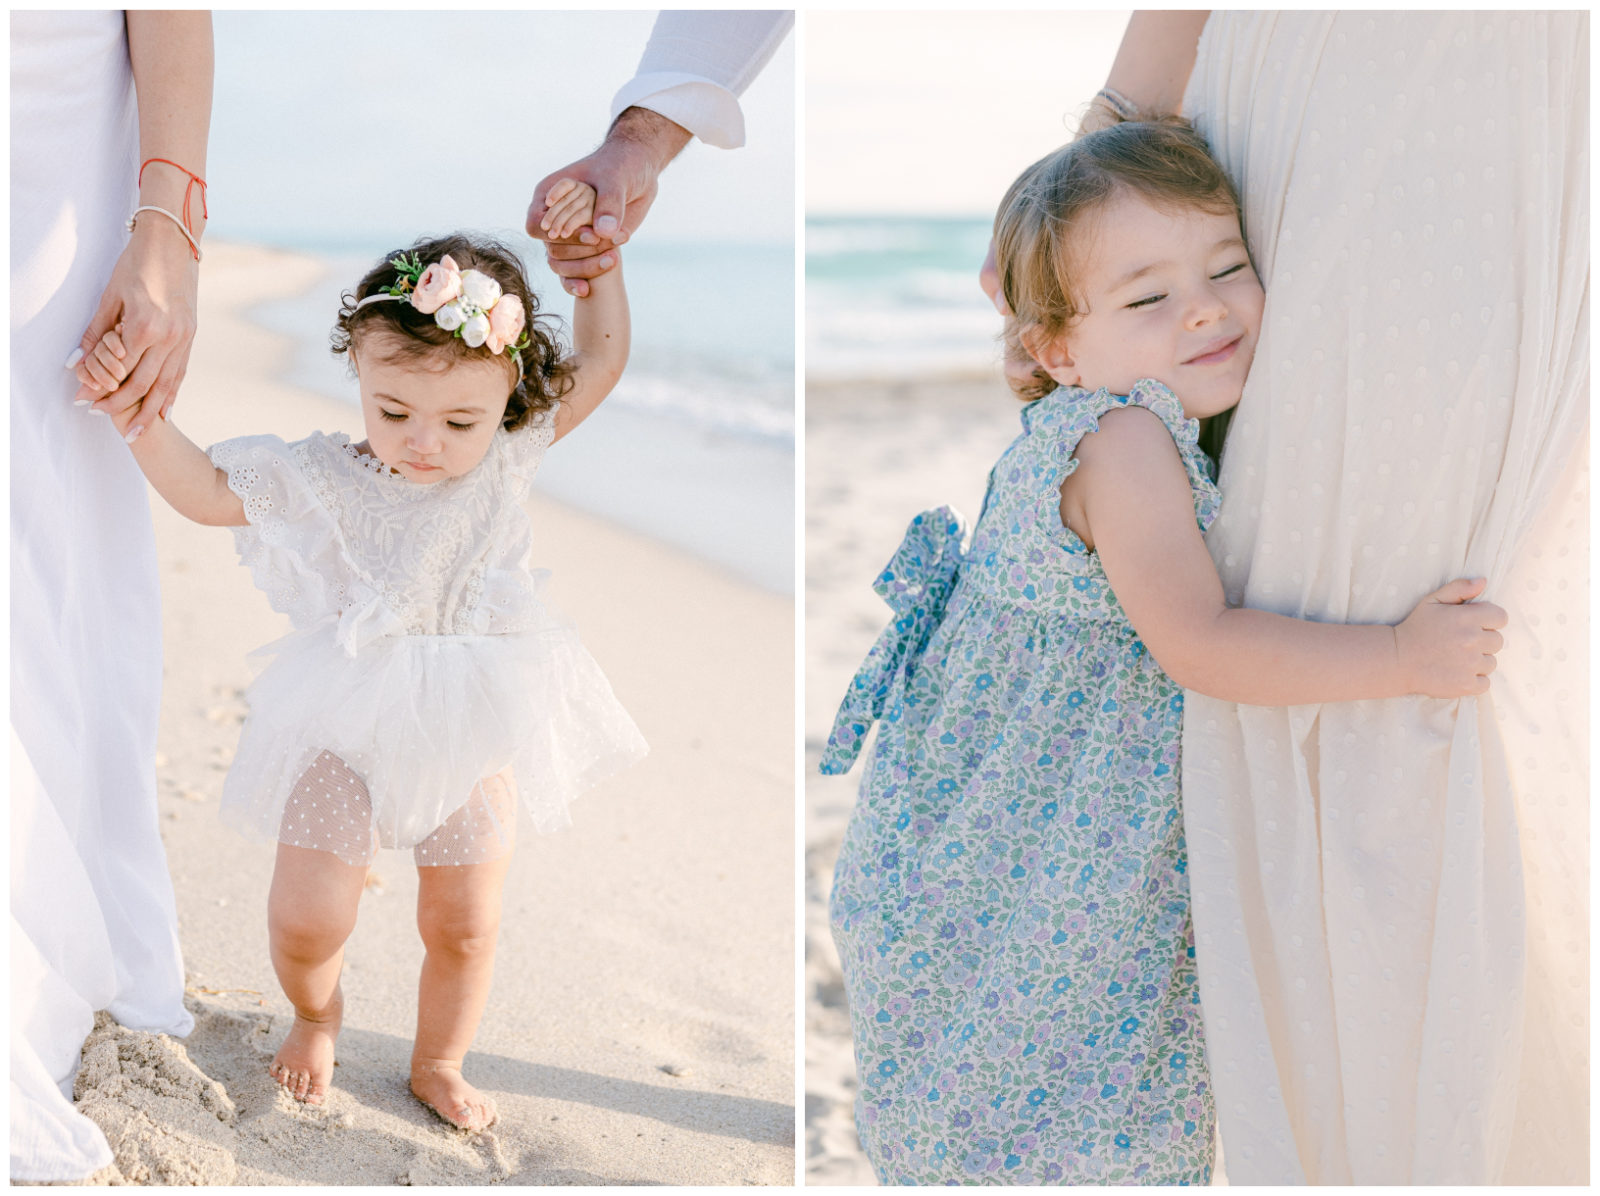 Baby girl walking on the beach outfit ideas